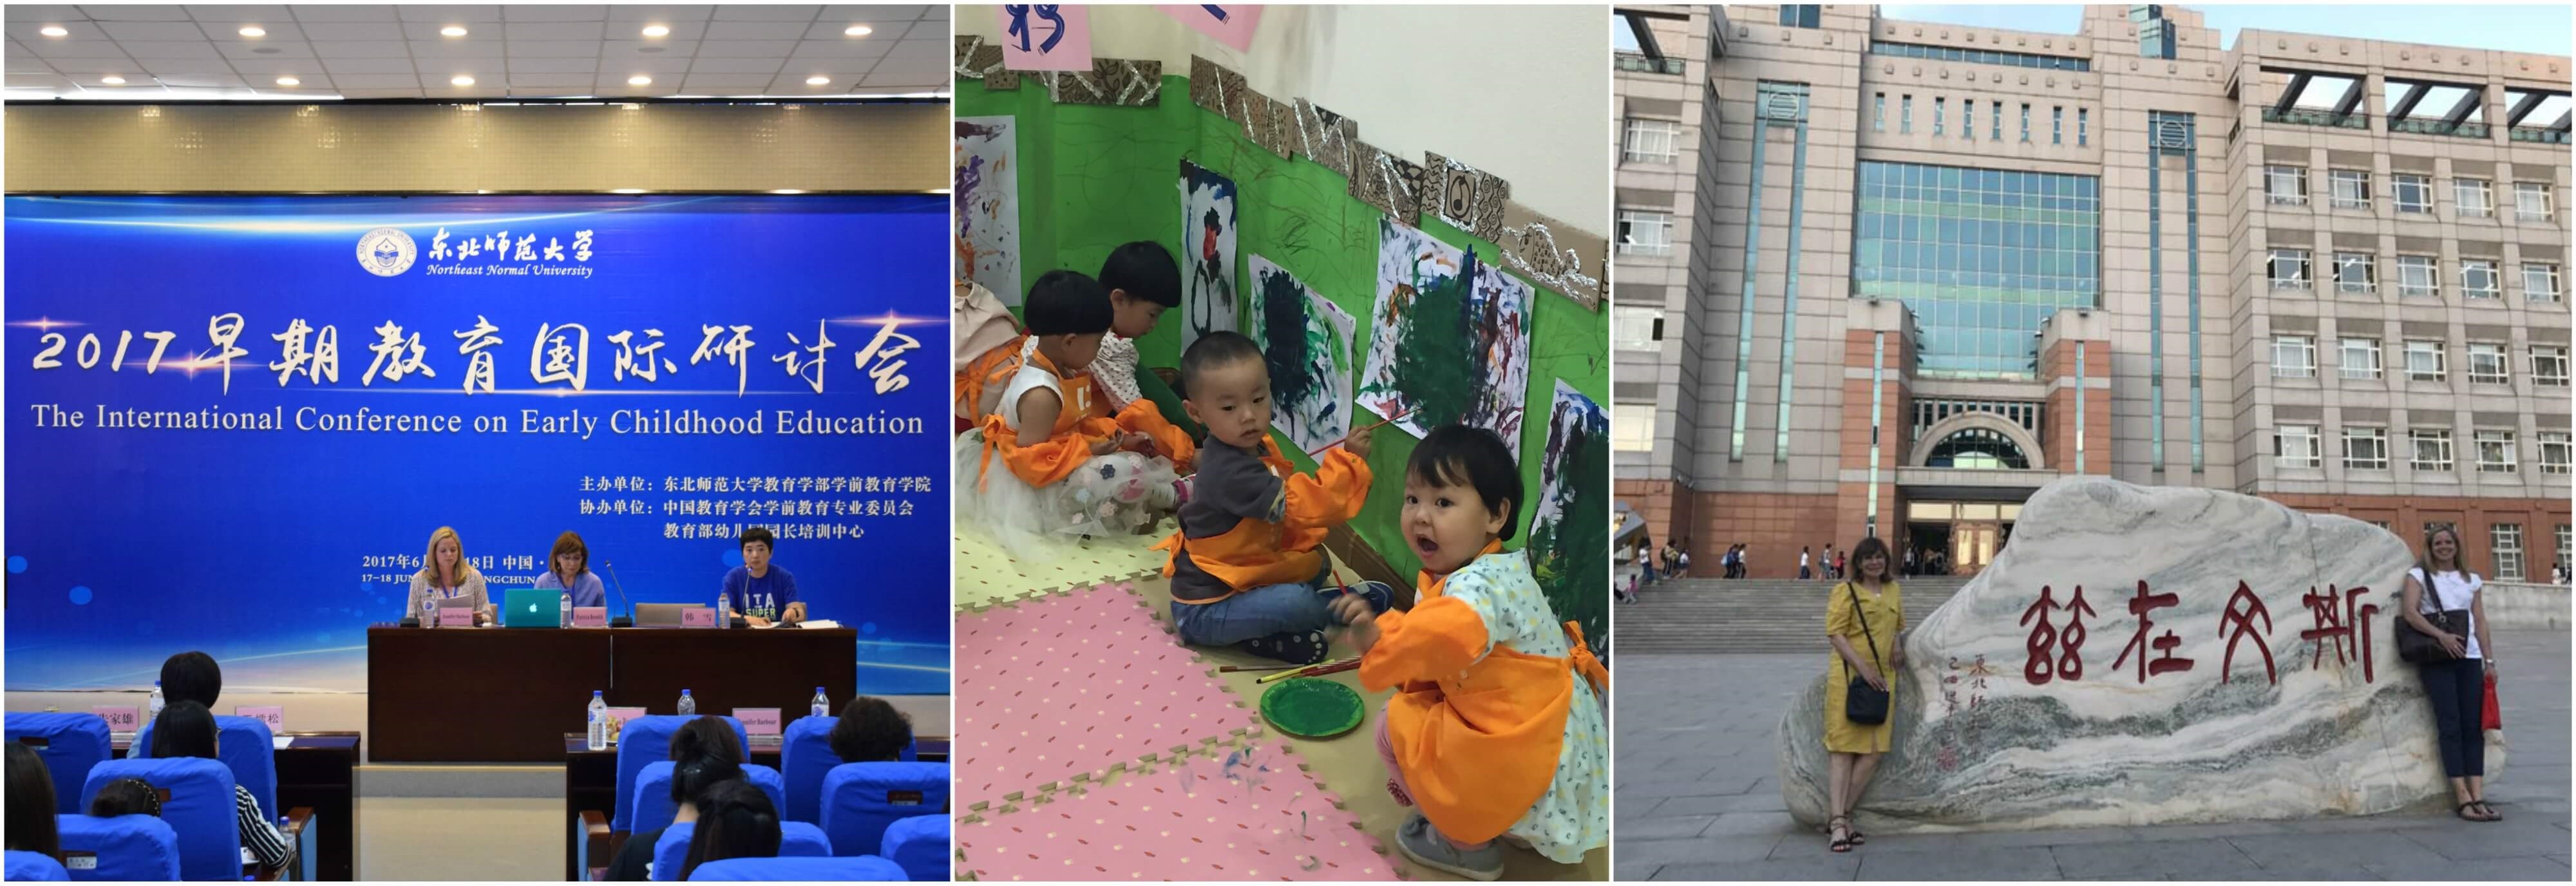 Pat Resnick and Jennifer Barbour in Changchun, China The first image is of Pat and Jennifer at an International Conference; the second image is of children in daycare; the third image is Pat and Jennifer outside Noth Eastern Normal University in Changchun, China